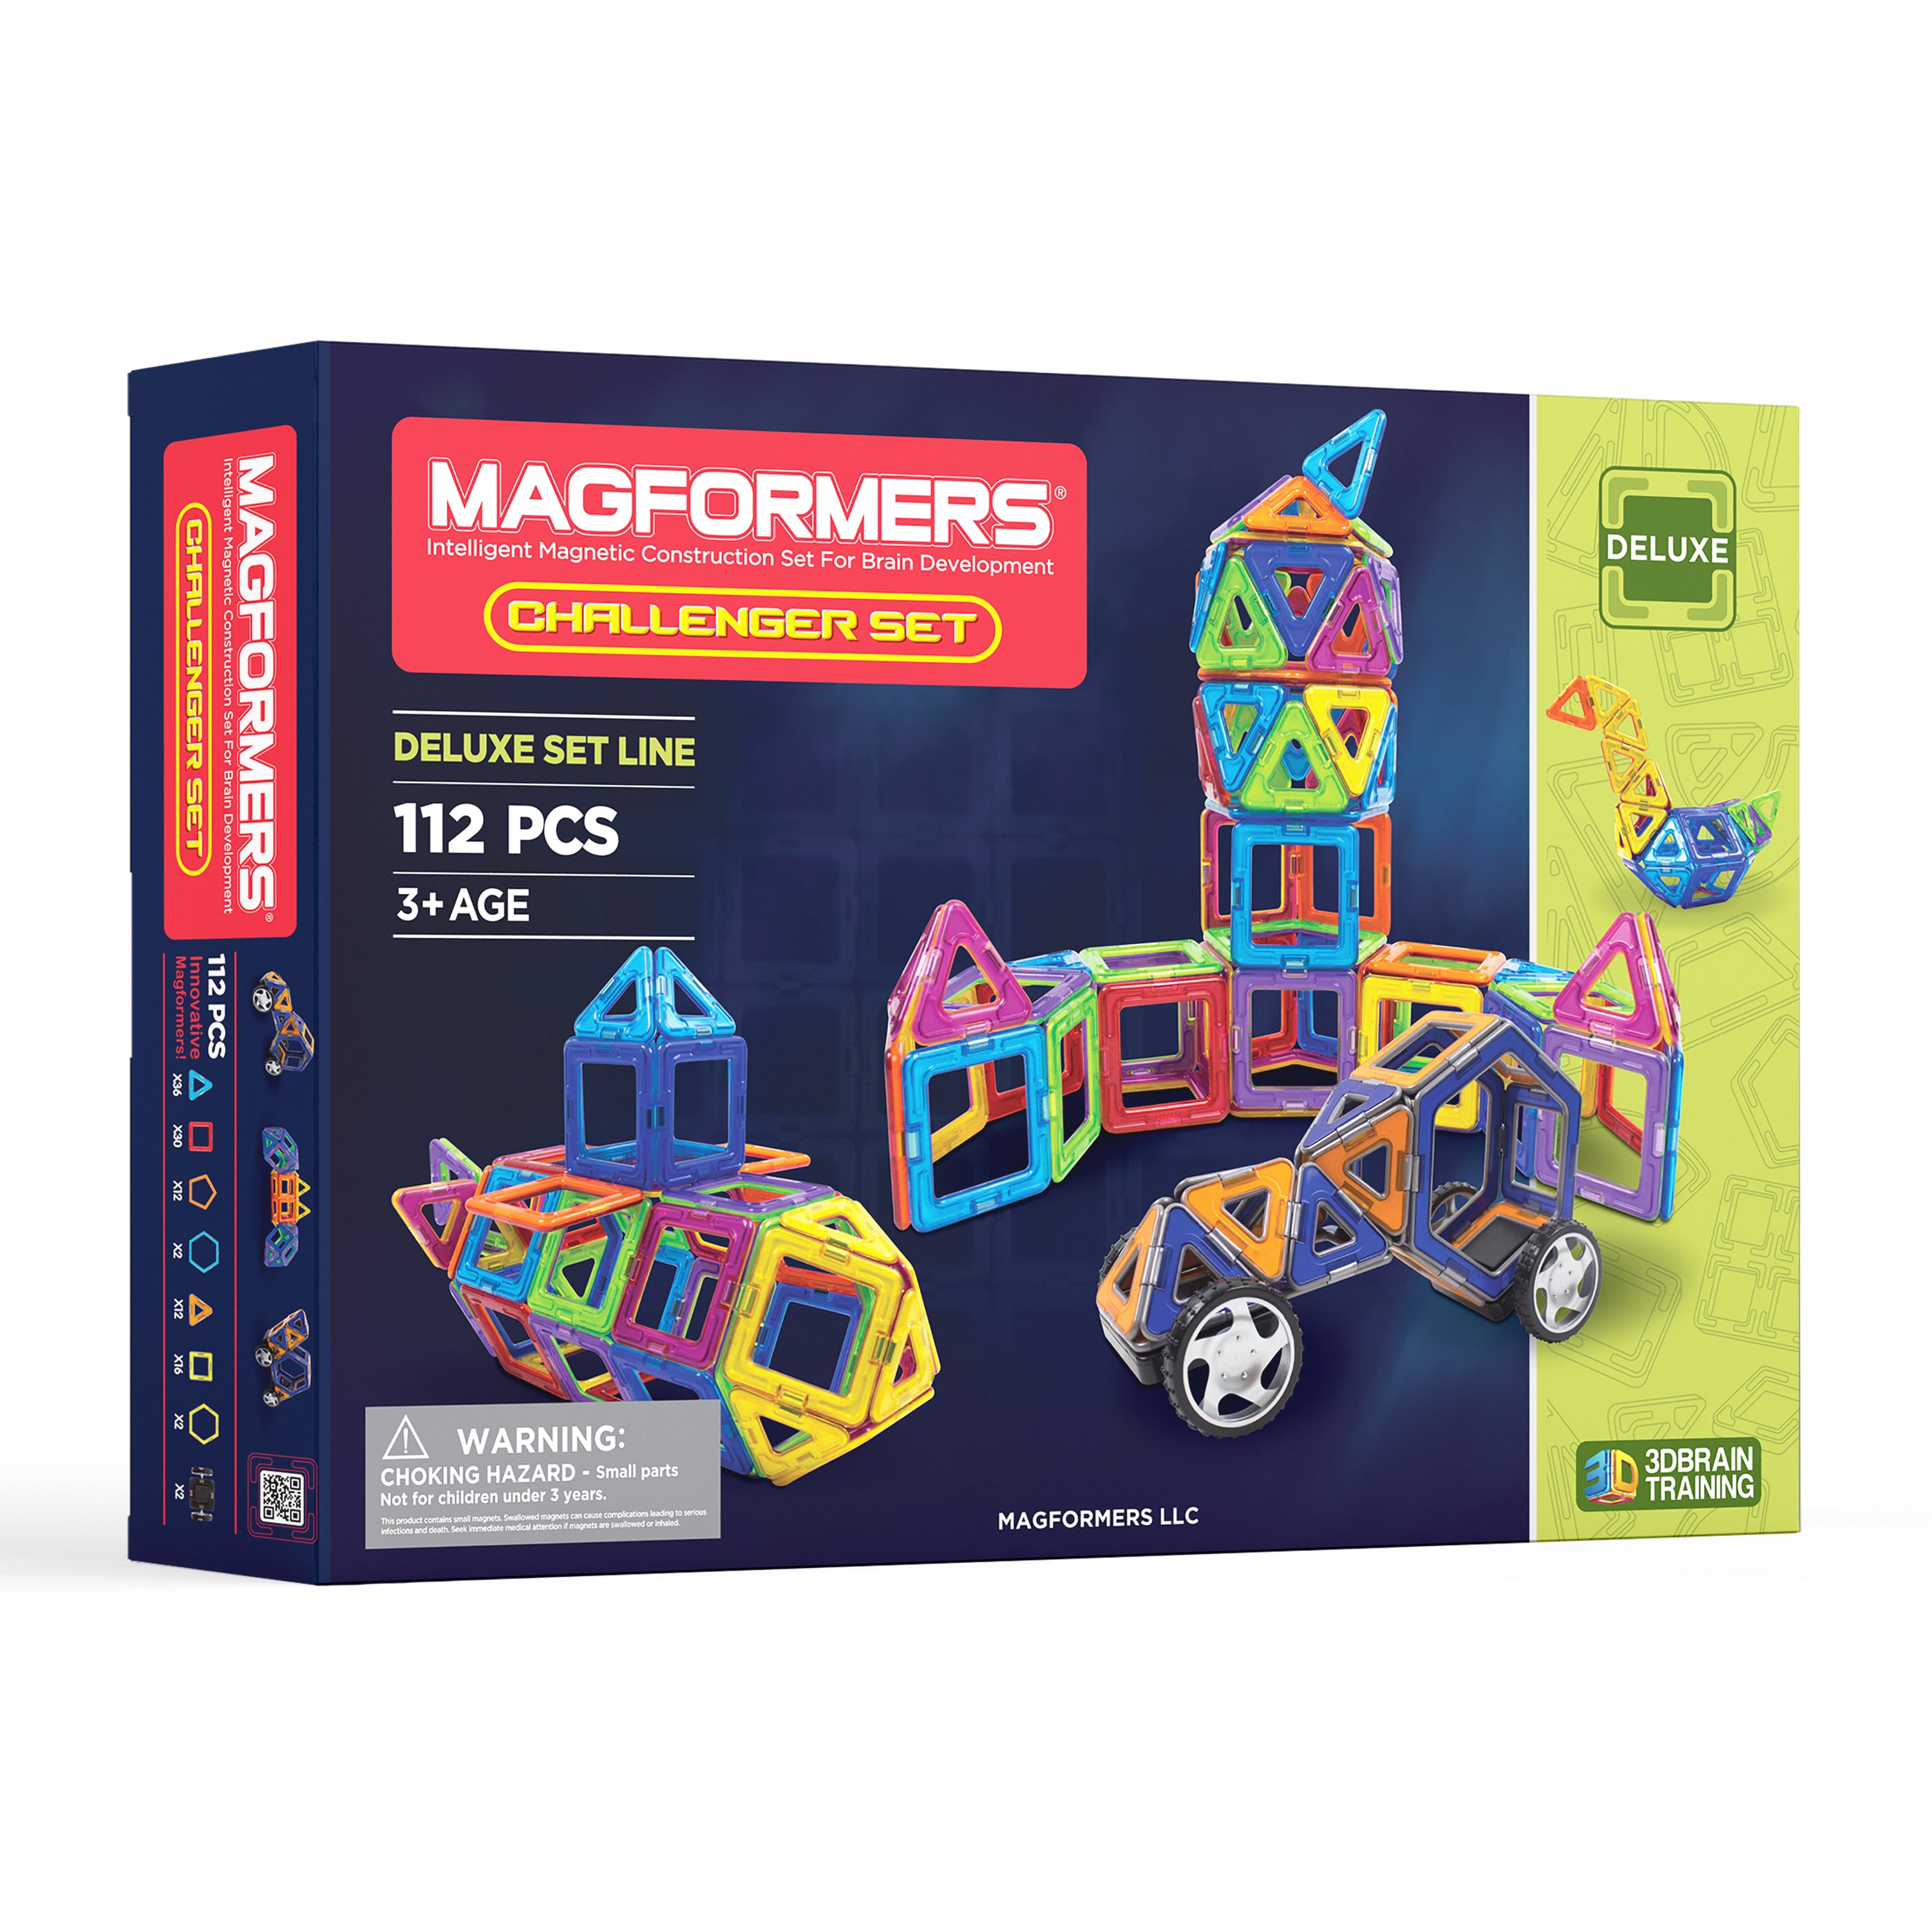 MAGFORMERS Challenger Set, MAGFORMERS